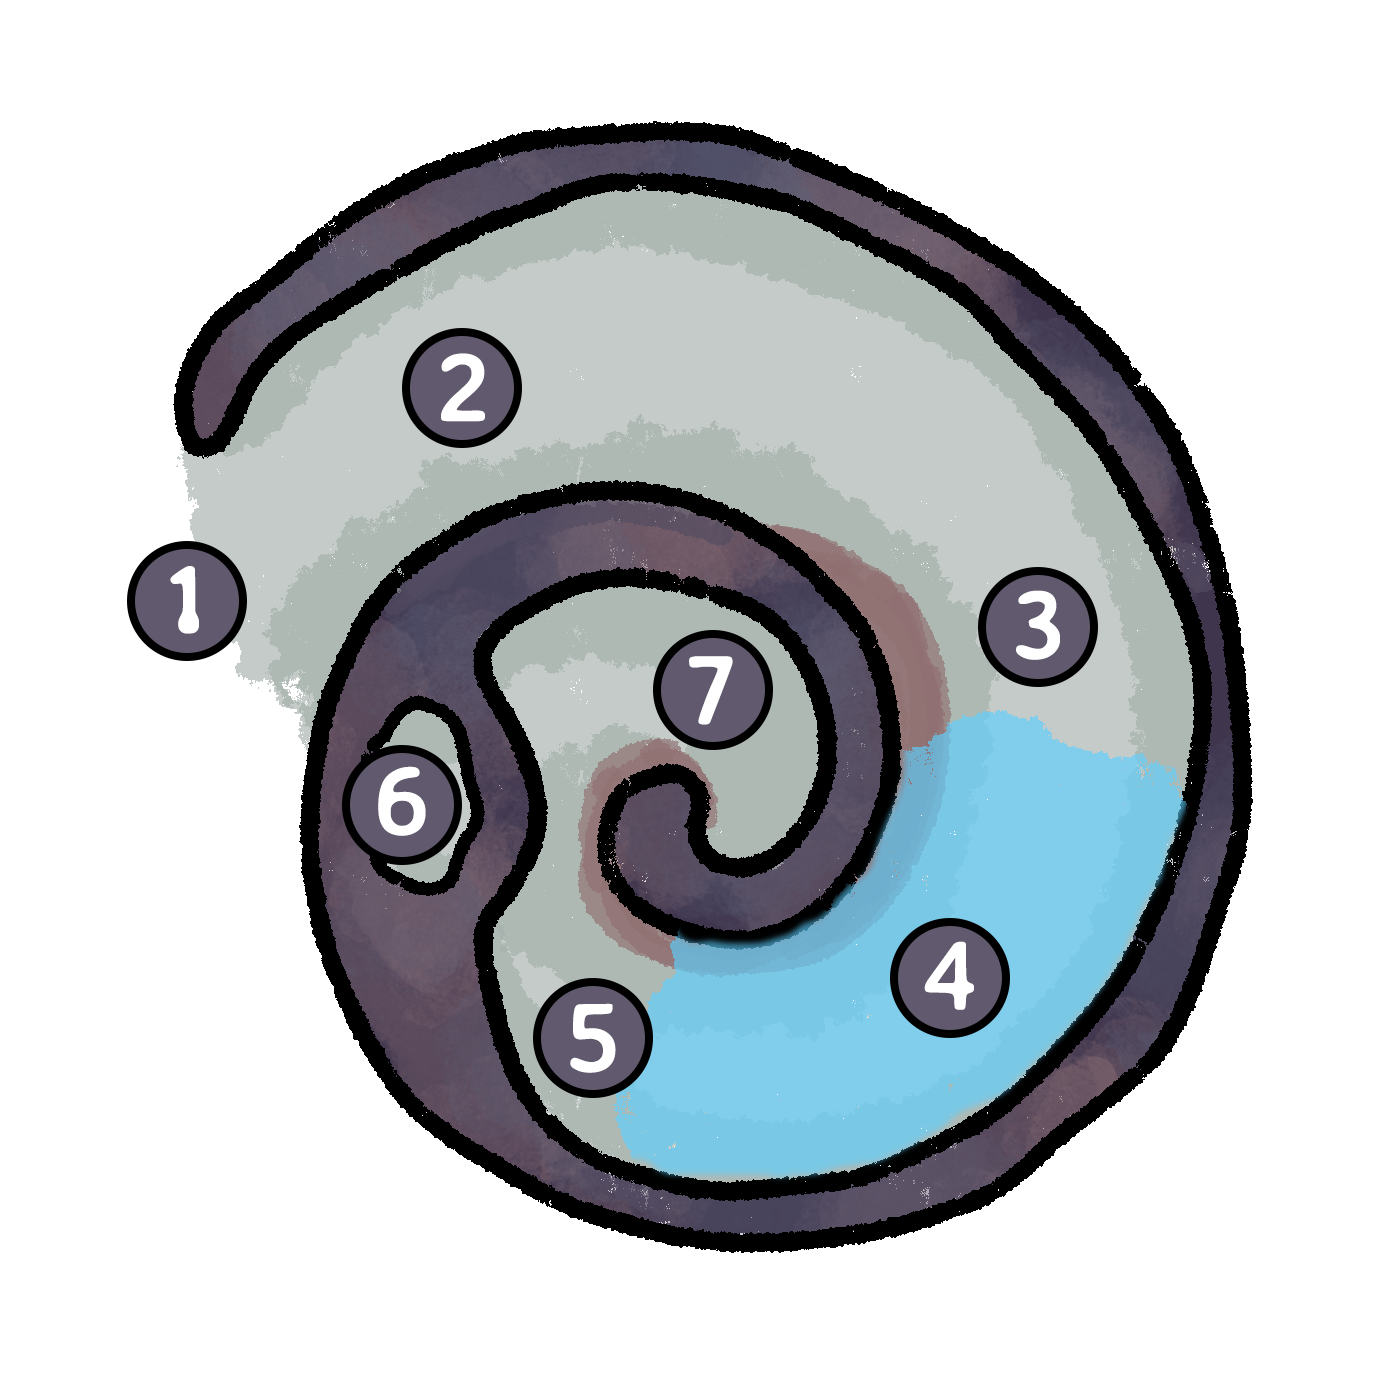 A spiralling dungeon map that looks like the inside of a snail shell. Parts of it are flooded and there’s a hidden chamber towards the end of the spiral, but otherwise it’s very linear.